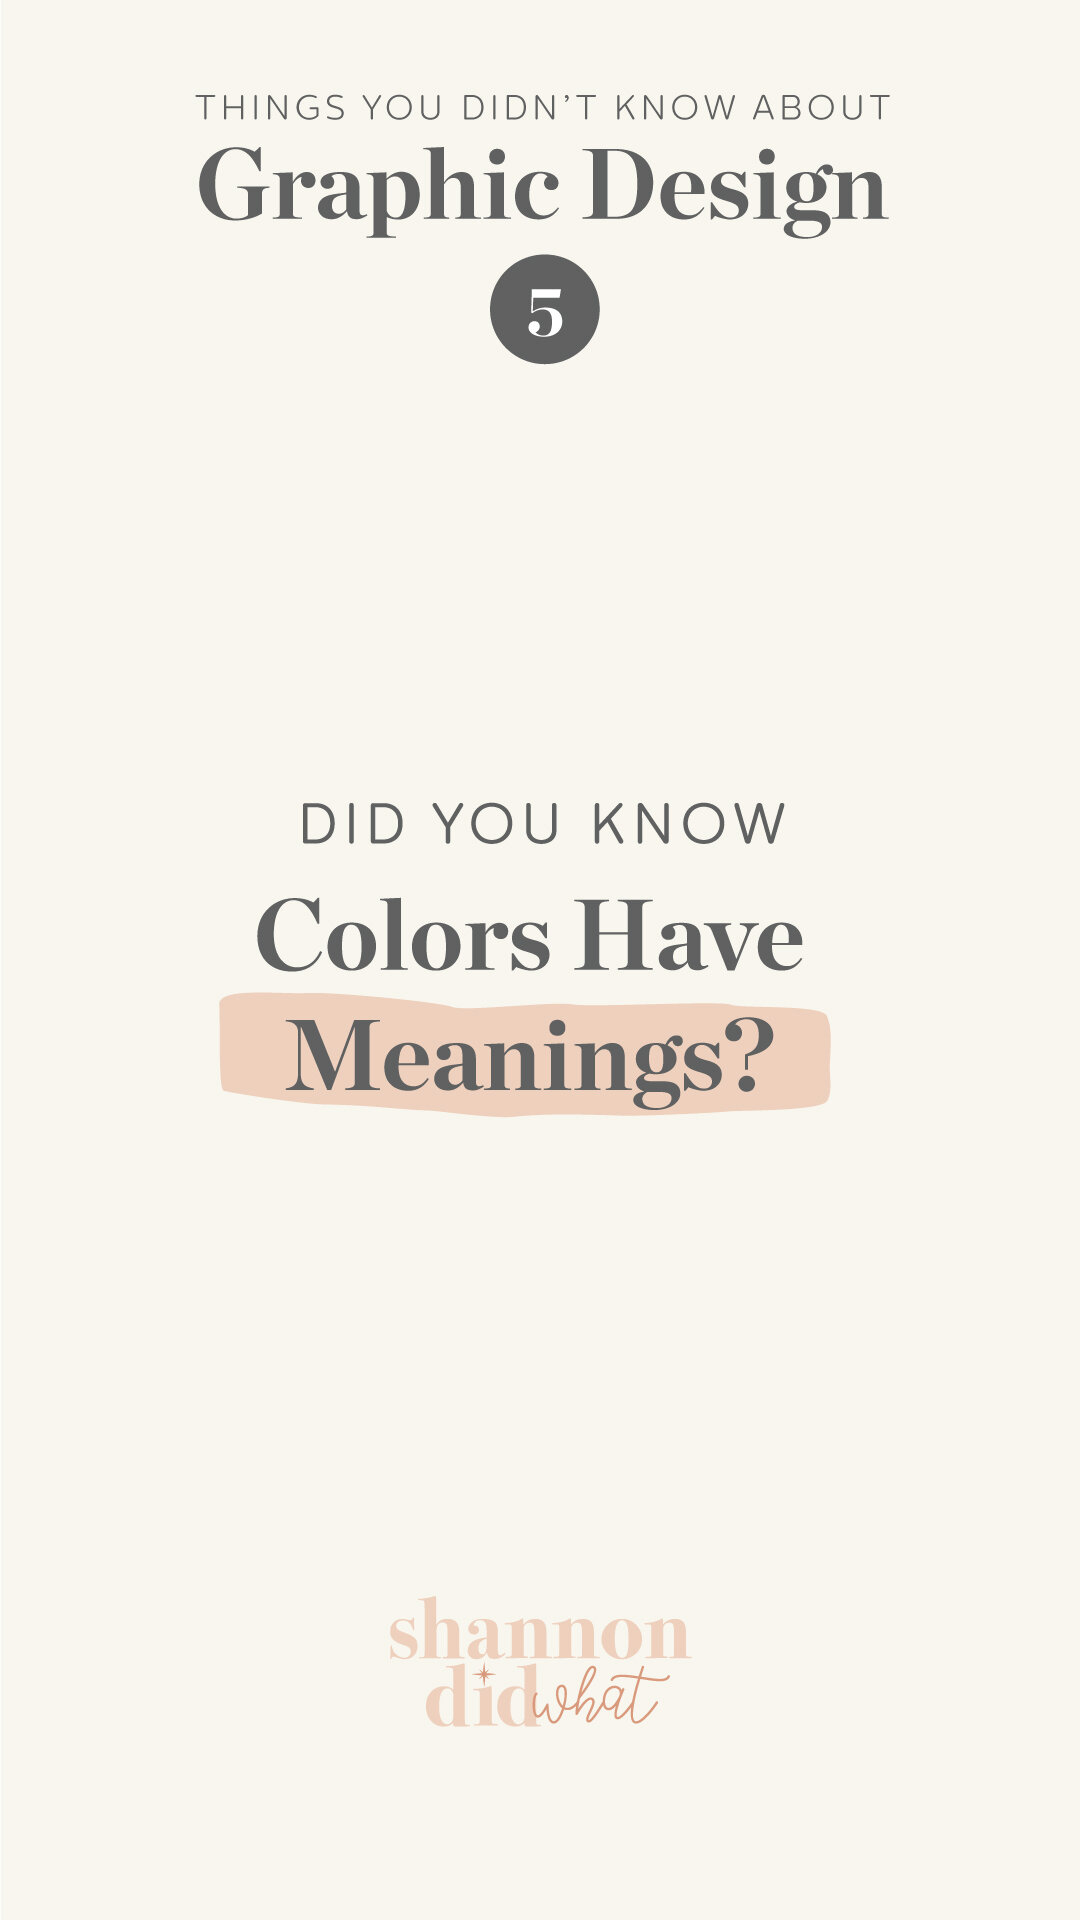 Things you didnt know about Graphic Design  - Colors have meanings (Copy) (Copy)